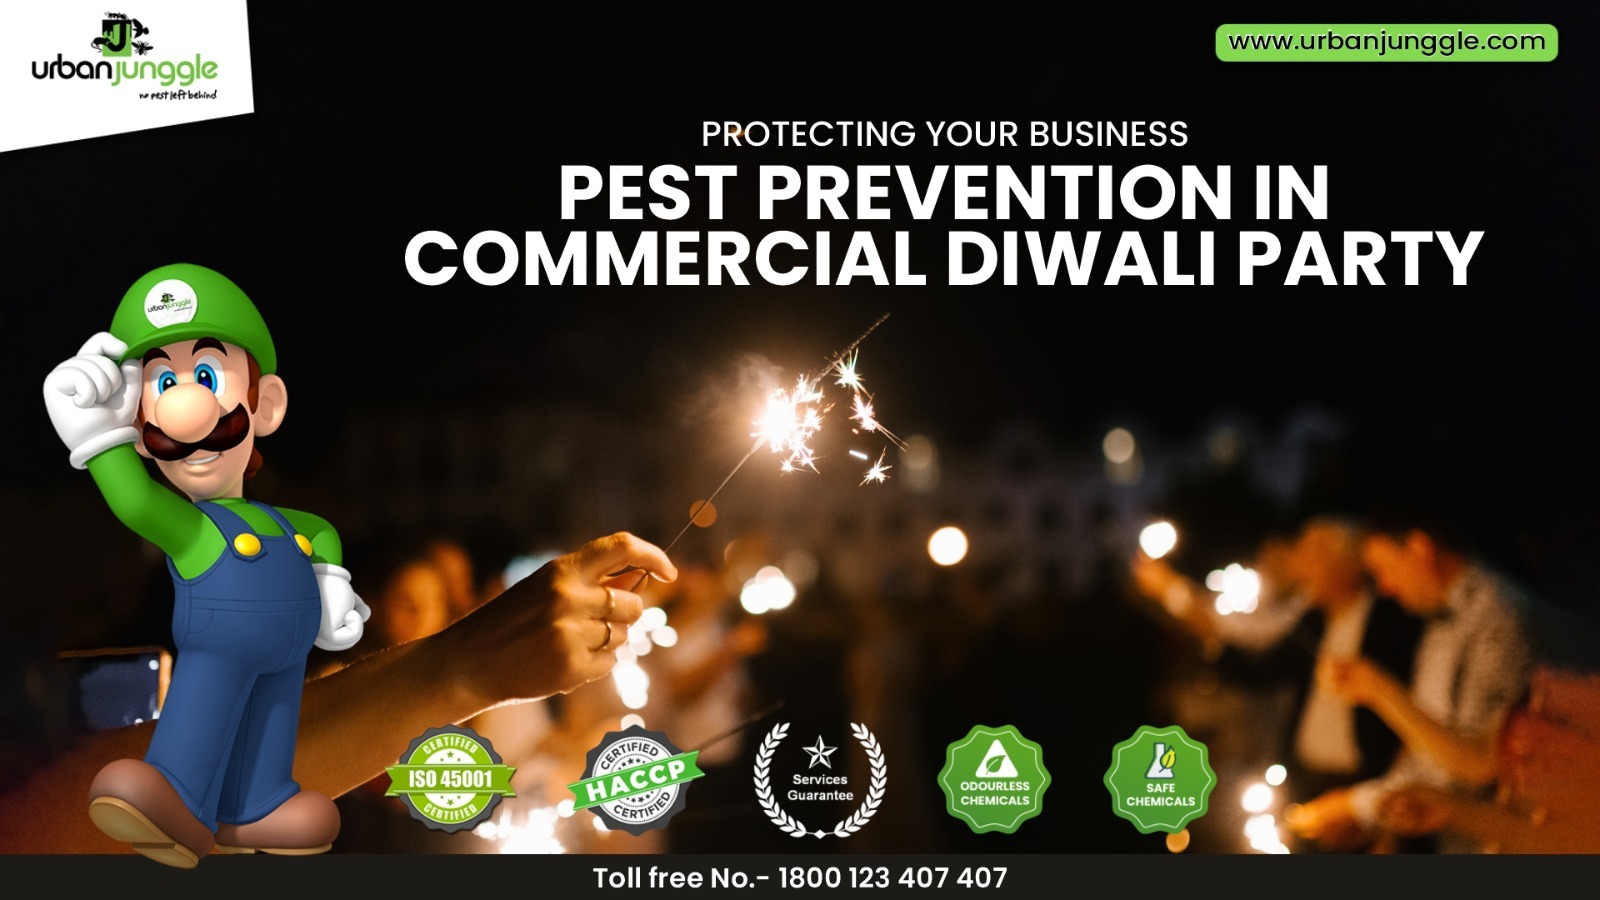 Protecting Your Business: Pest Prevention in Commercial Diwali Party